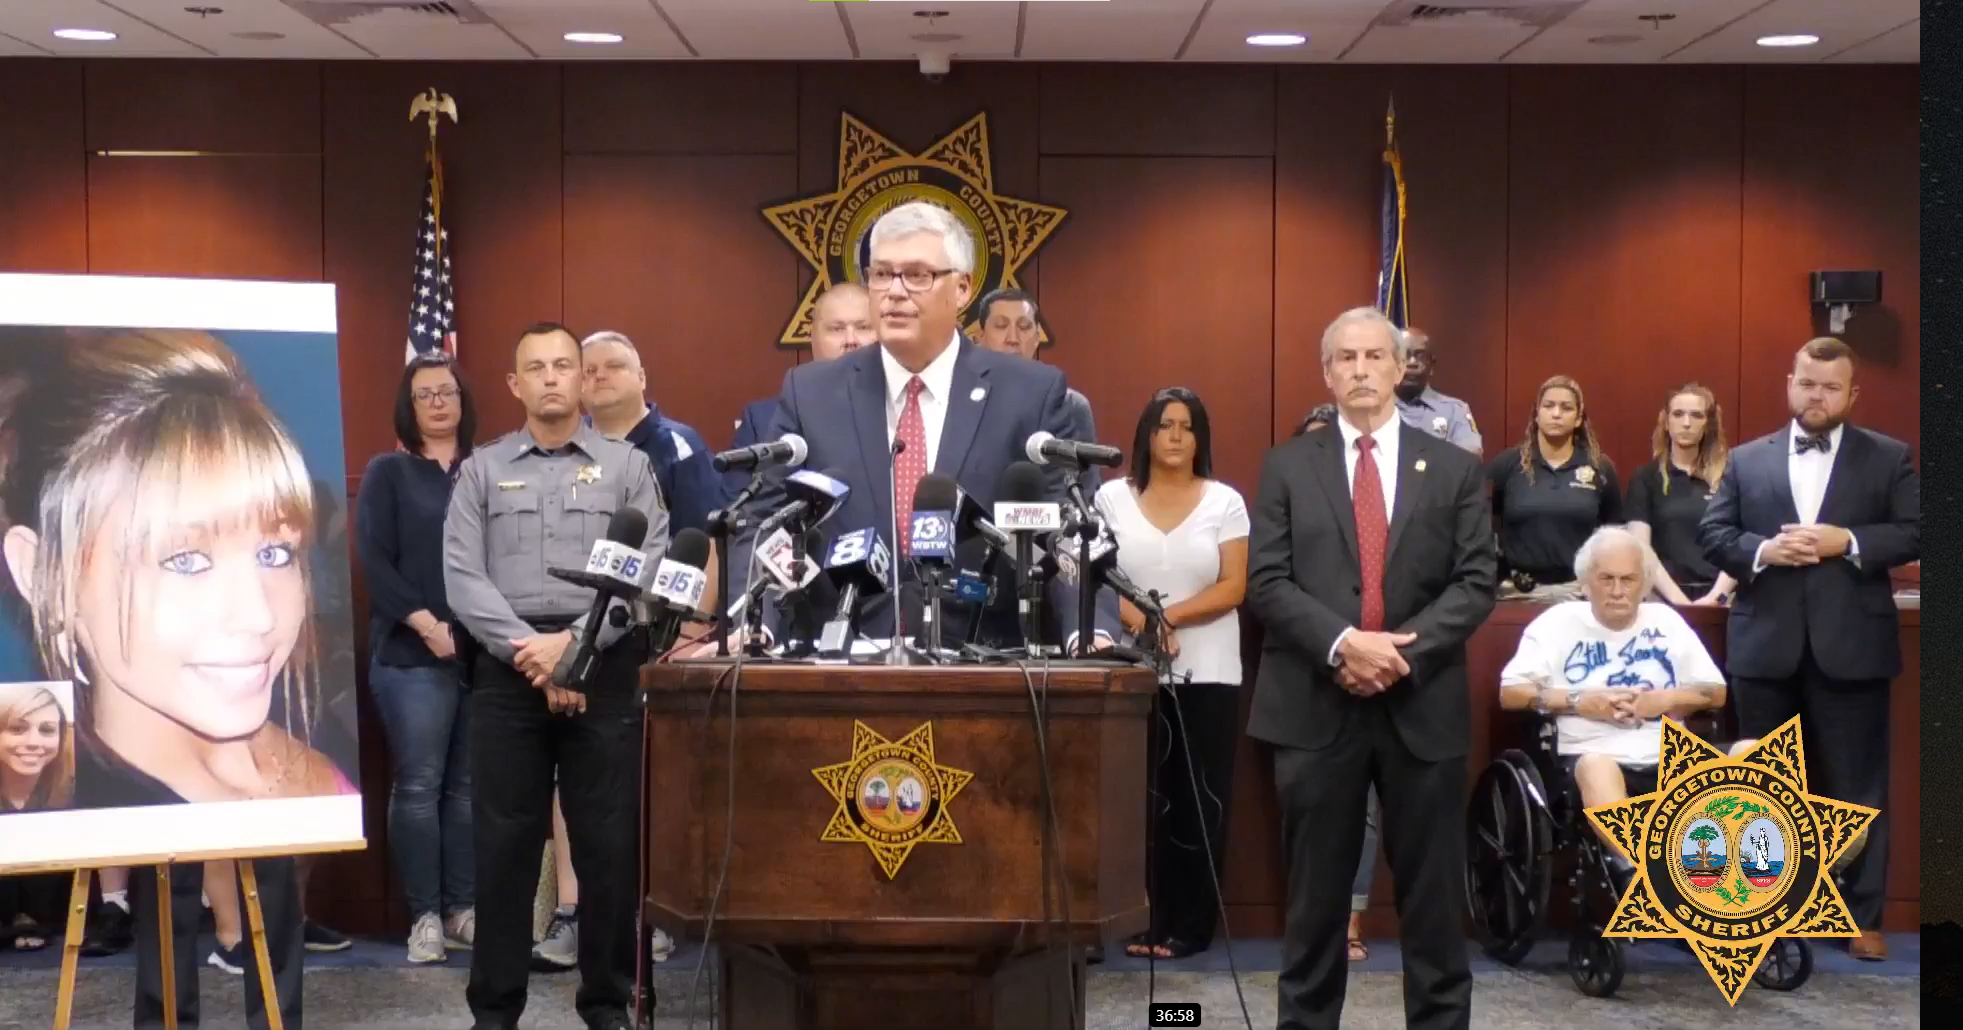 PHOTO: In this screen grab from a video, Sheriff Carter Weaver speaks at a press conference about the remains of Brittanee Drexel being found and the arrest of Raymond Moody, on May 16, 2022, in Georgetown County, S.C.